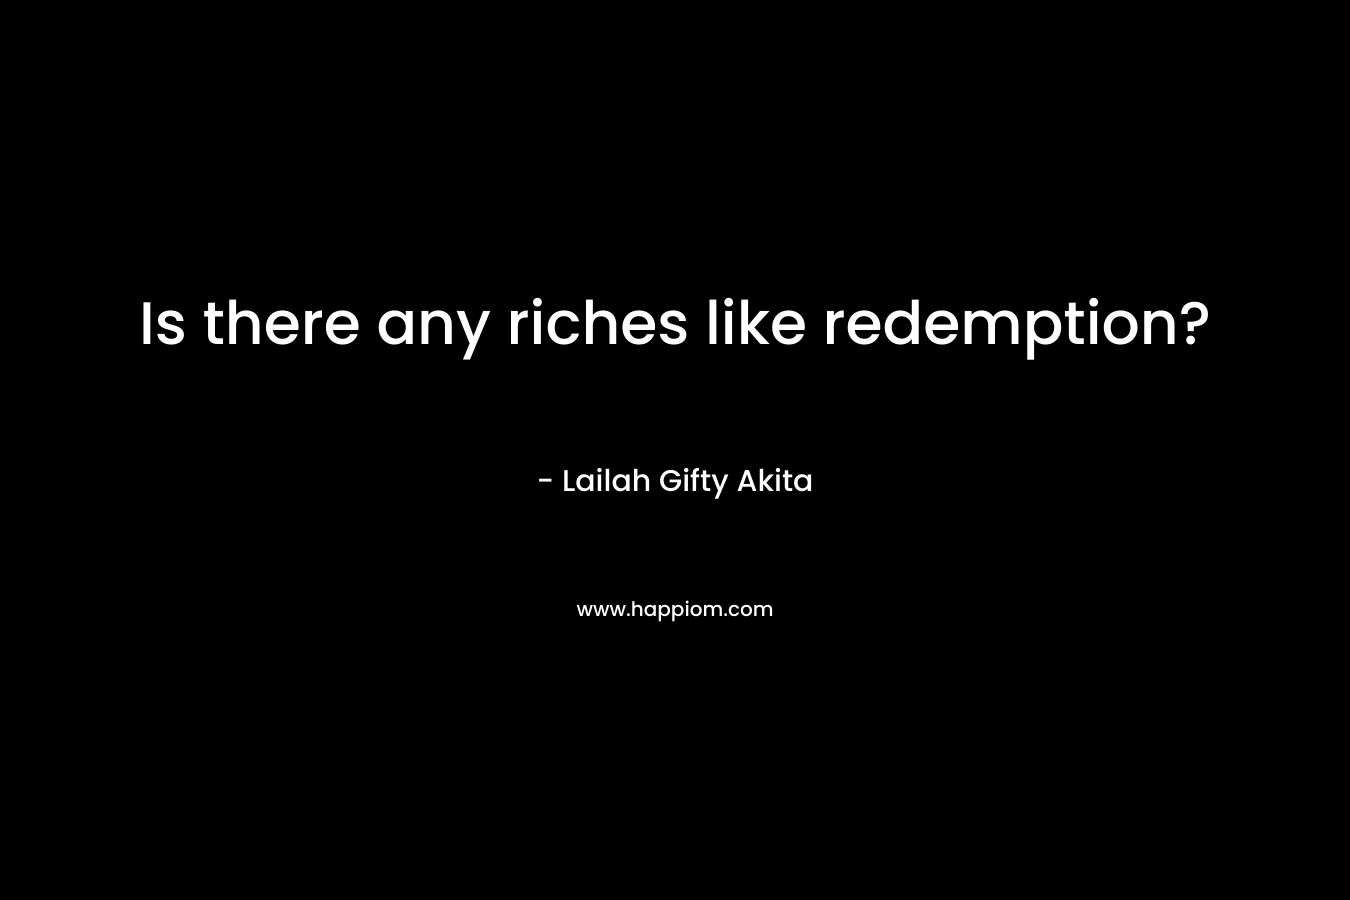 Is there any riches like redemption?